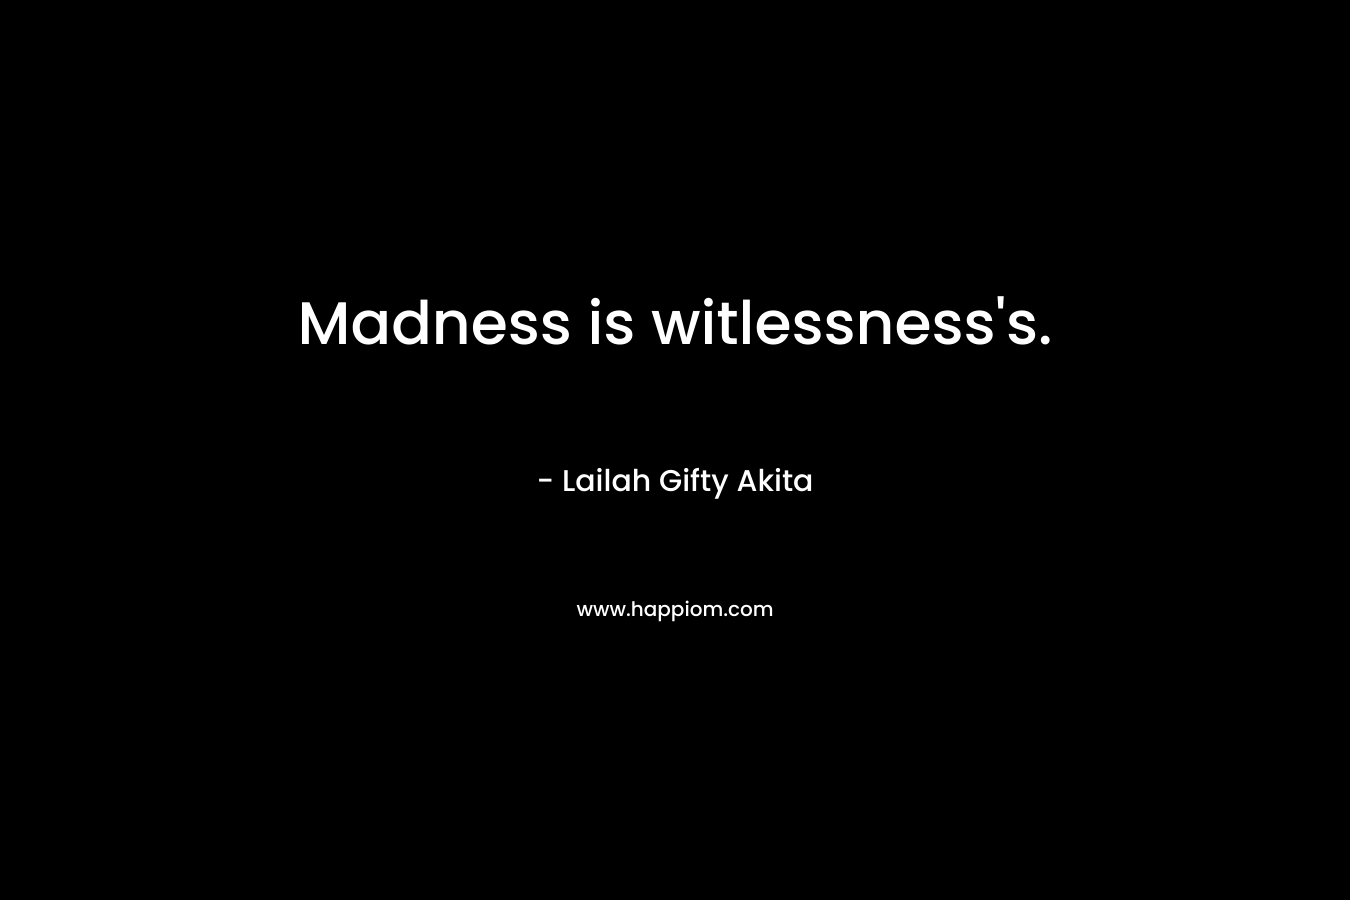 Madness is witlessness's.